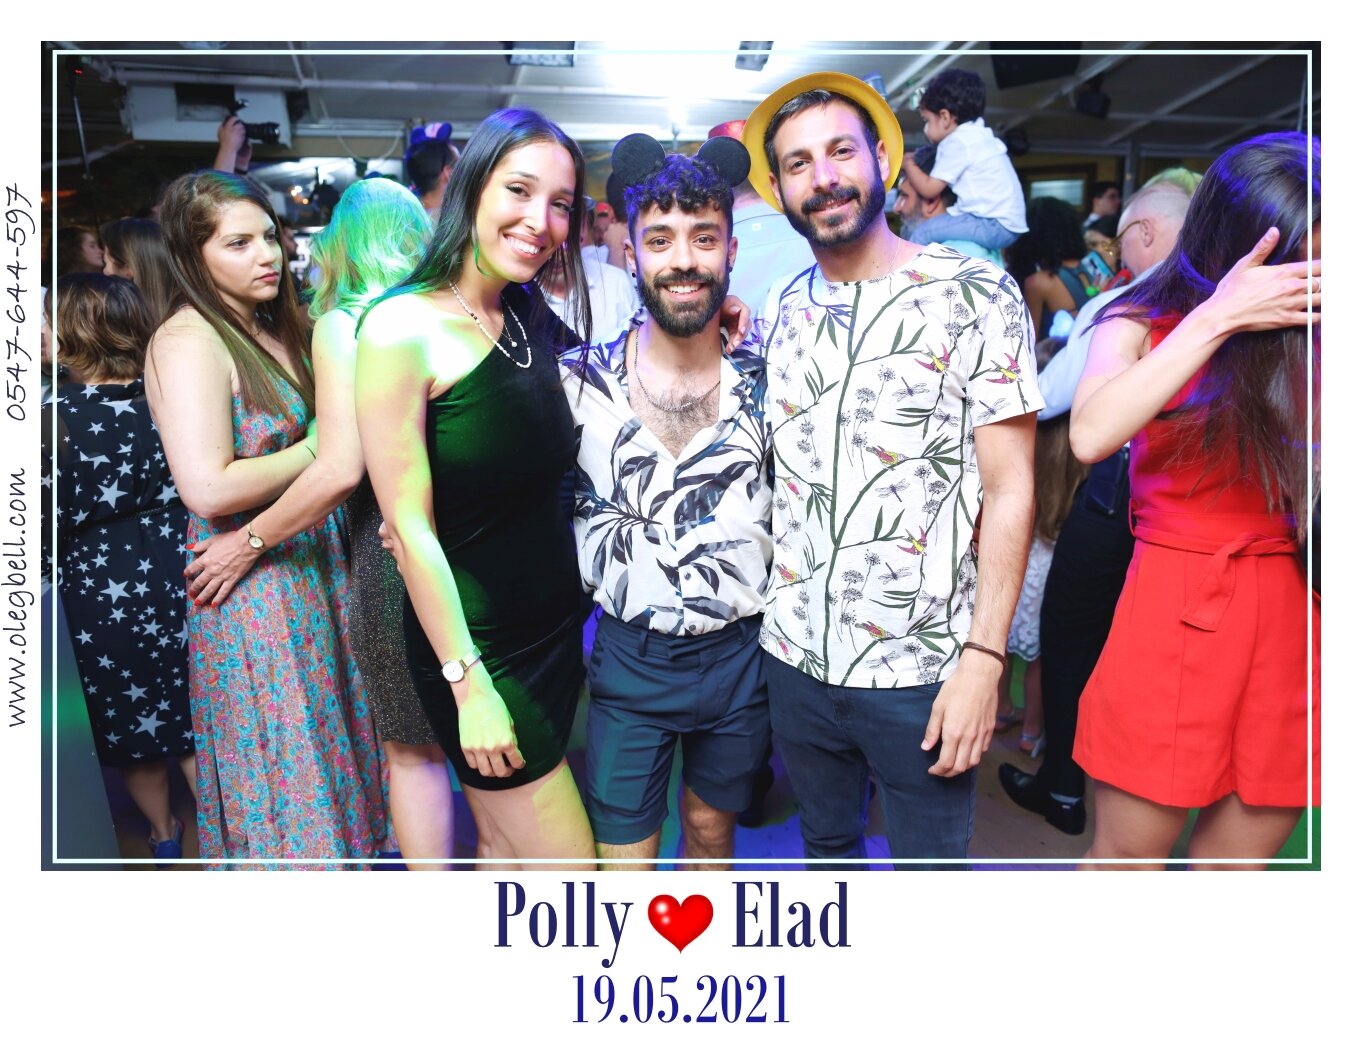 POLLY_AND_ELAD_WD_MG_SITE_031.JPG